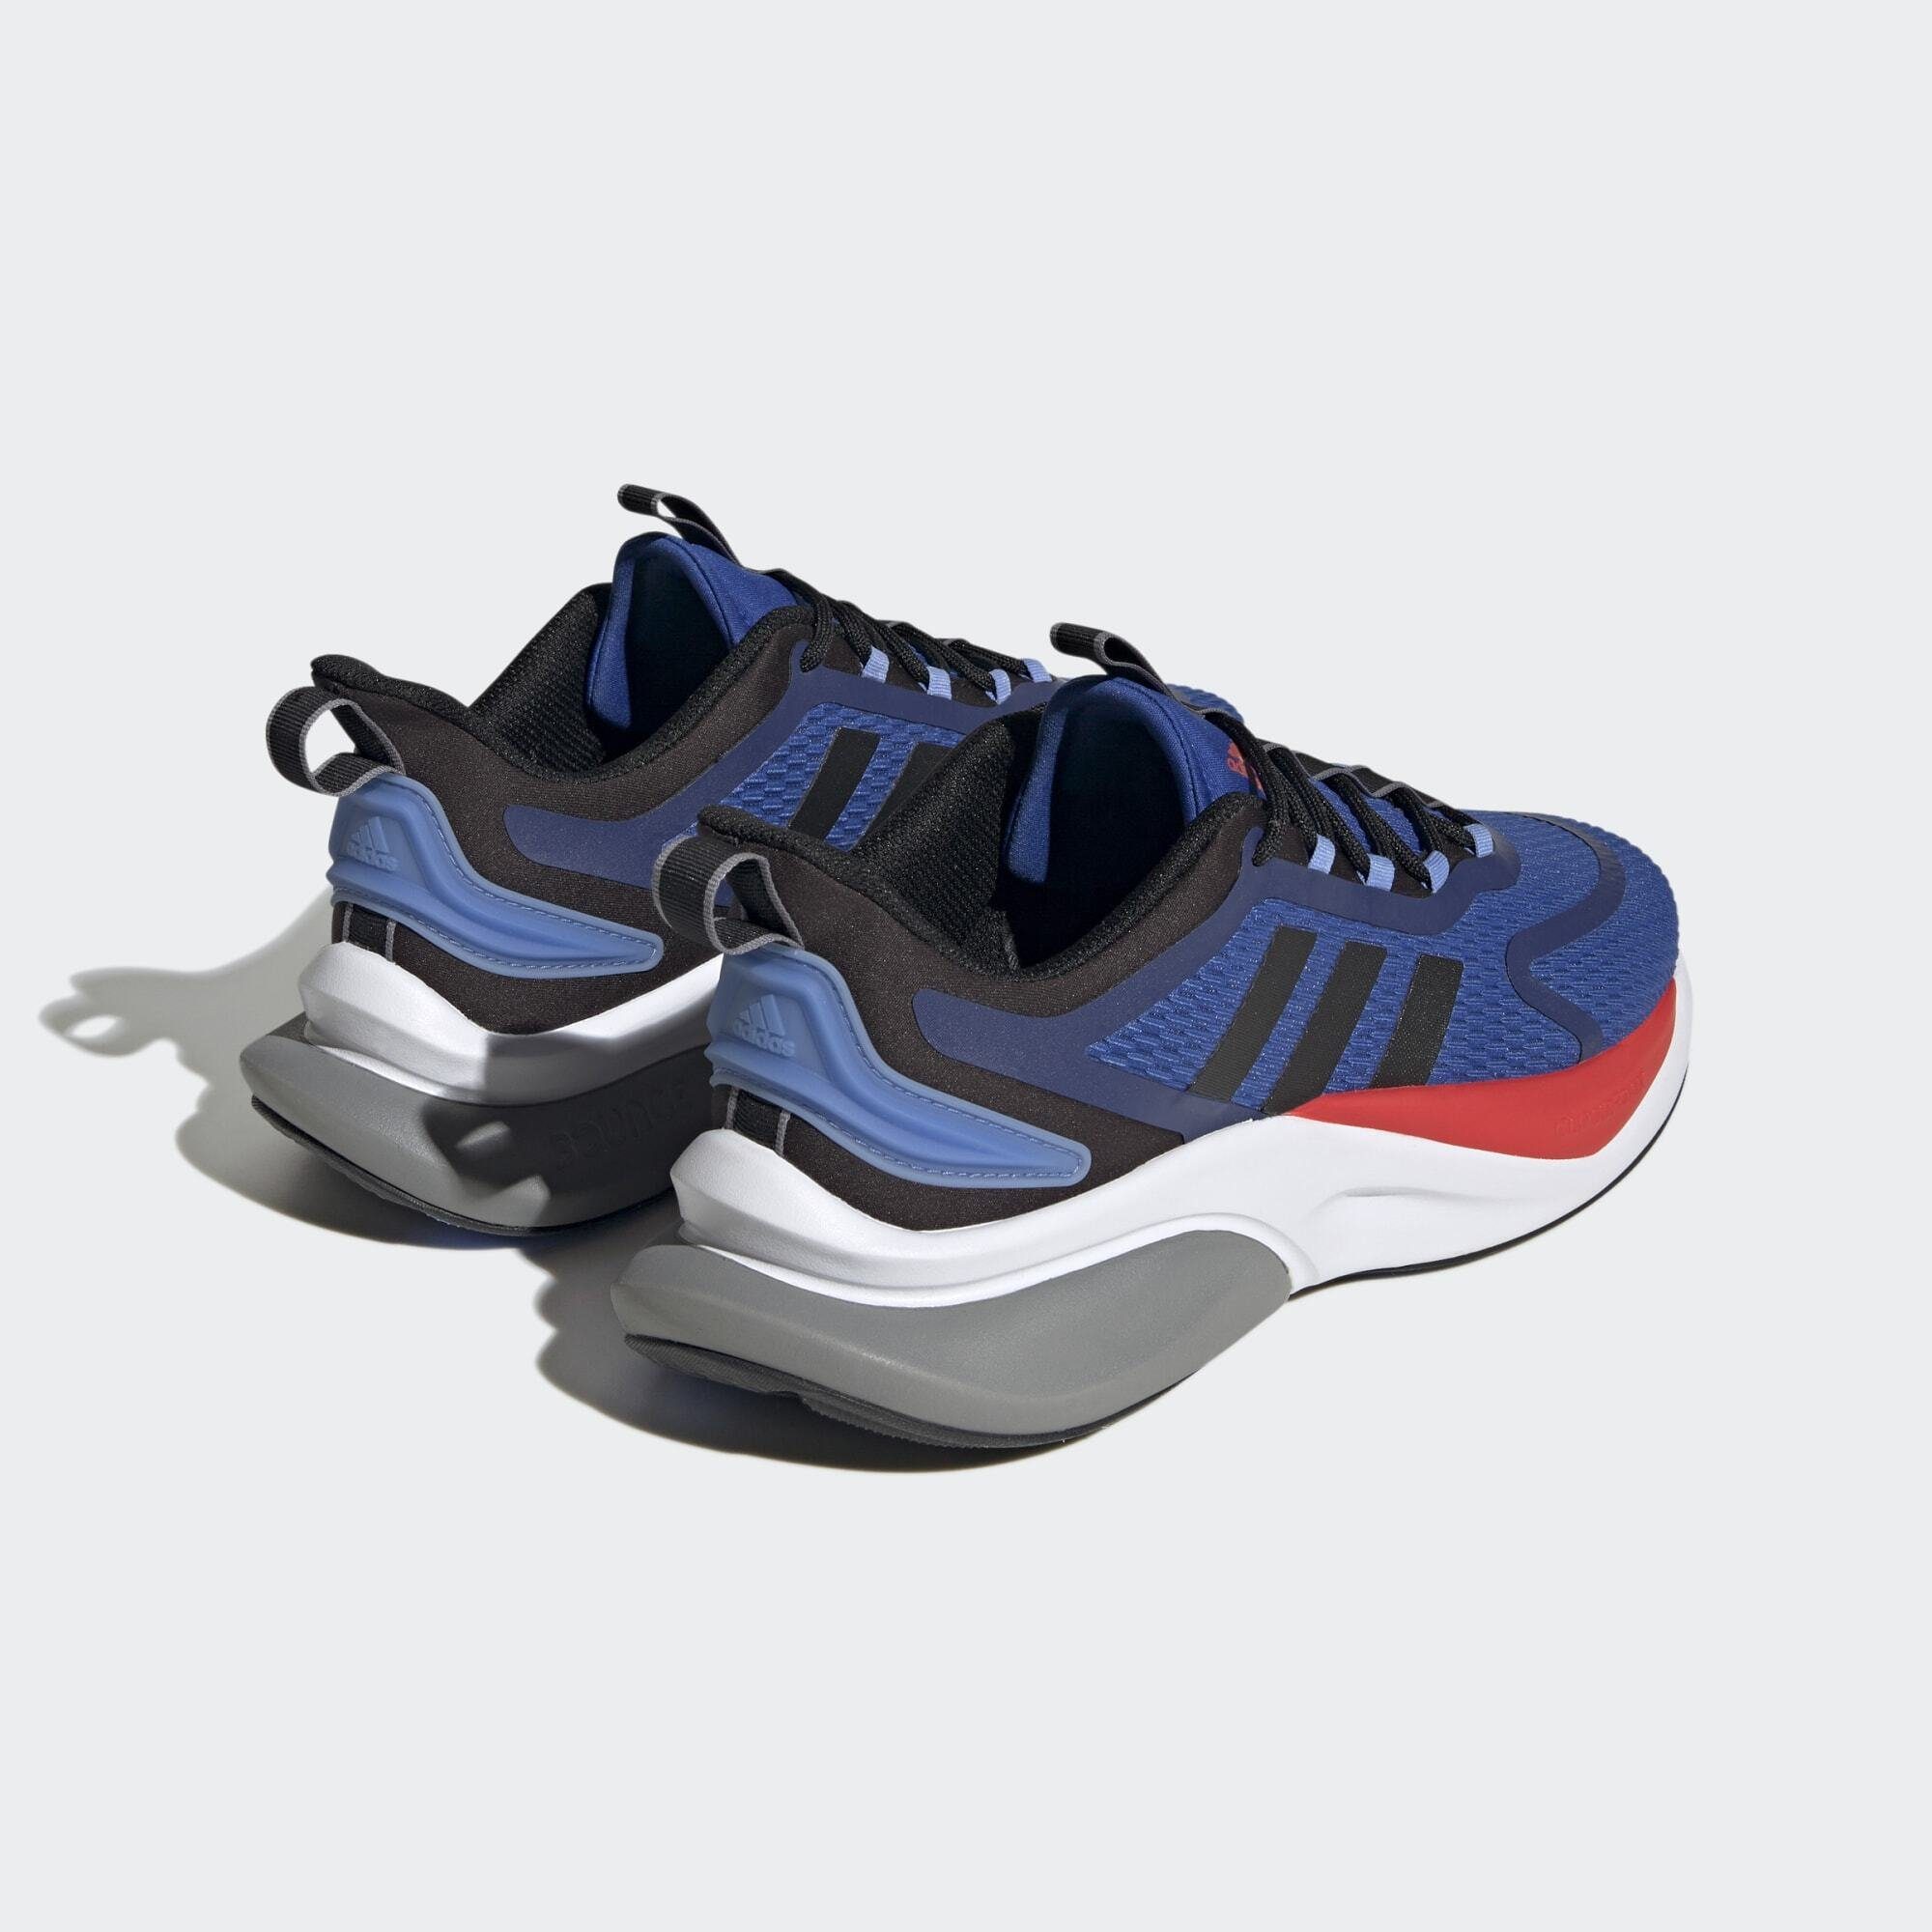 / Black BOUNCE Red Core Sportswear ALPHABOUNCE+ / Blue Bright Sneaker SCHUH Royal adidas